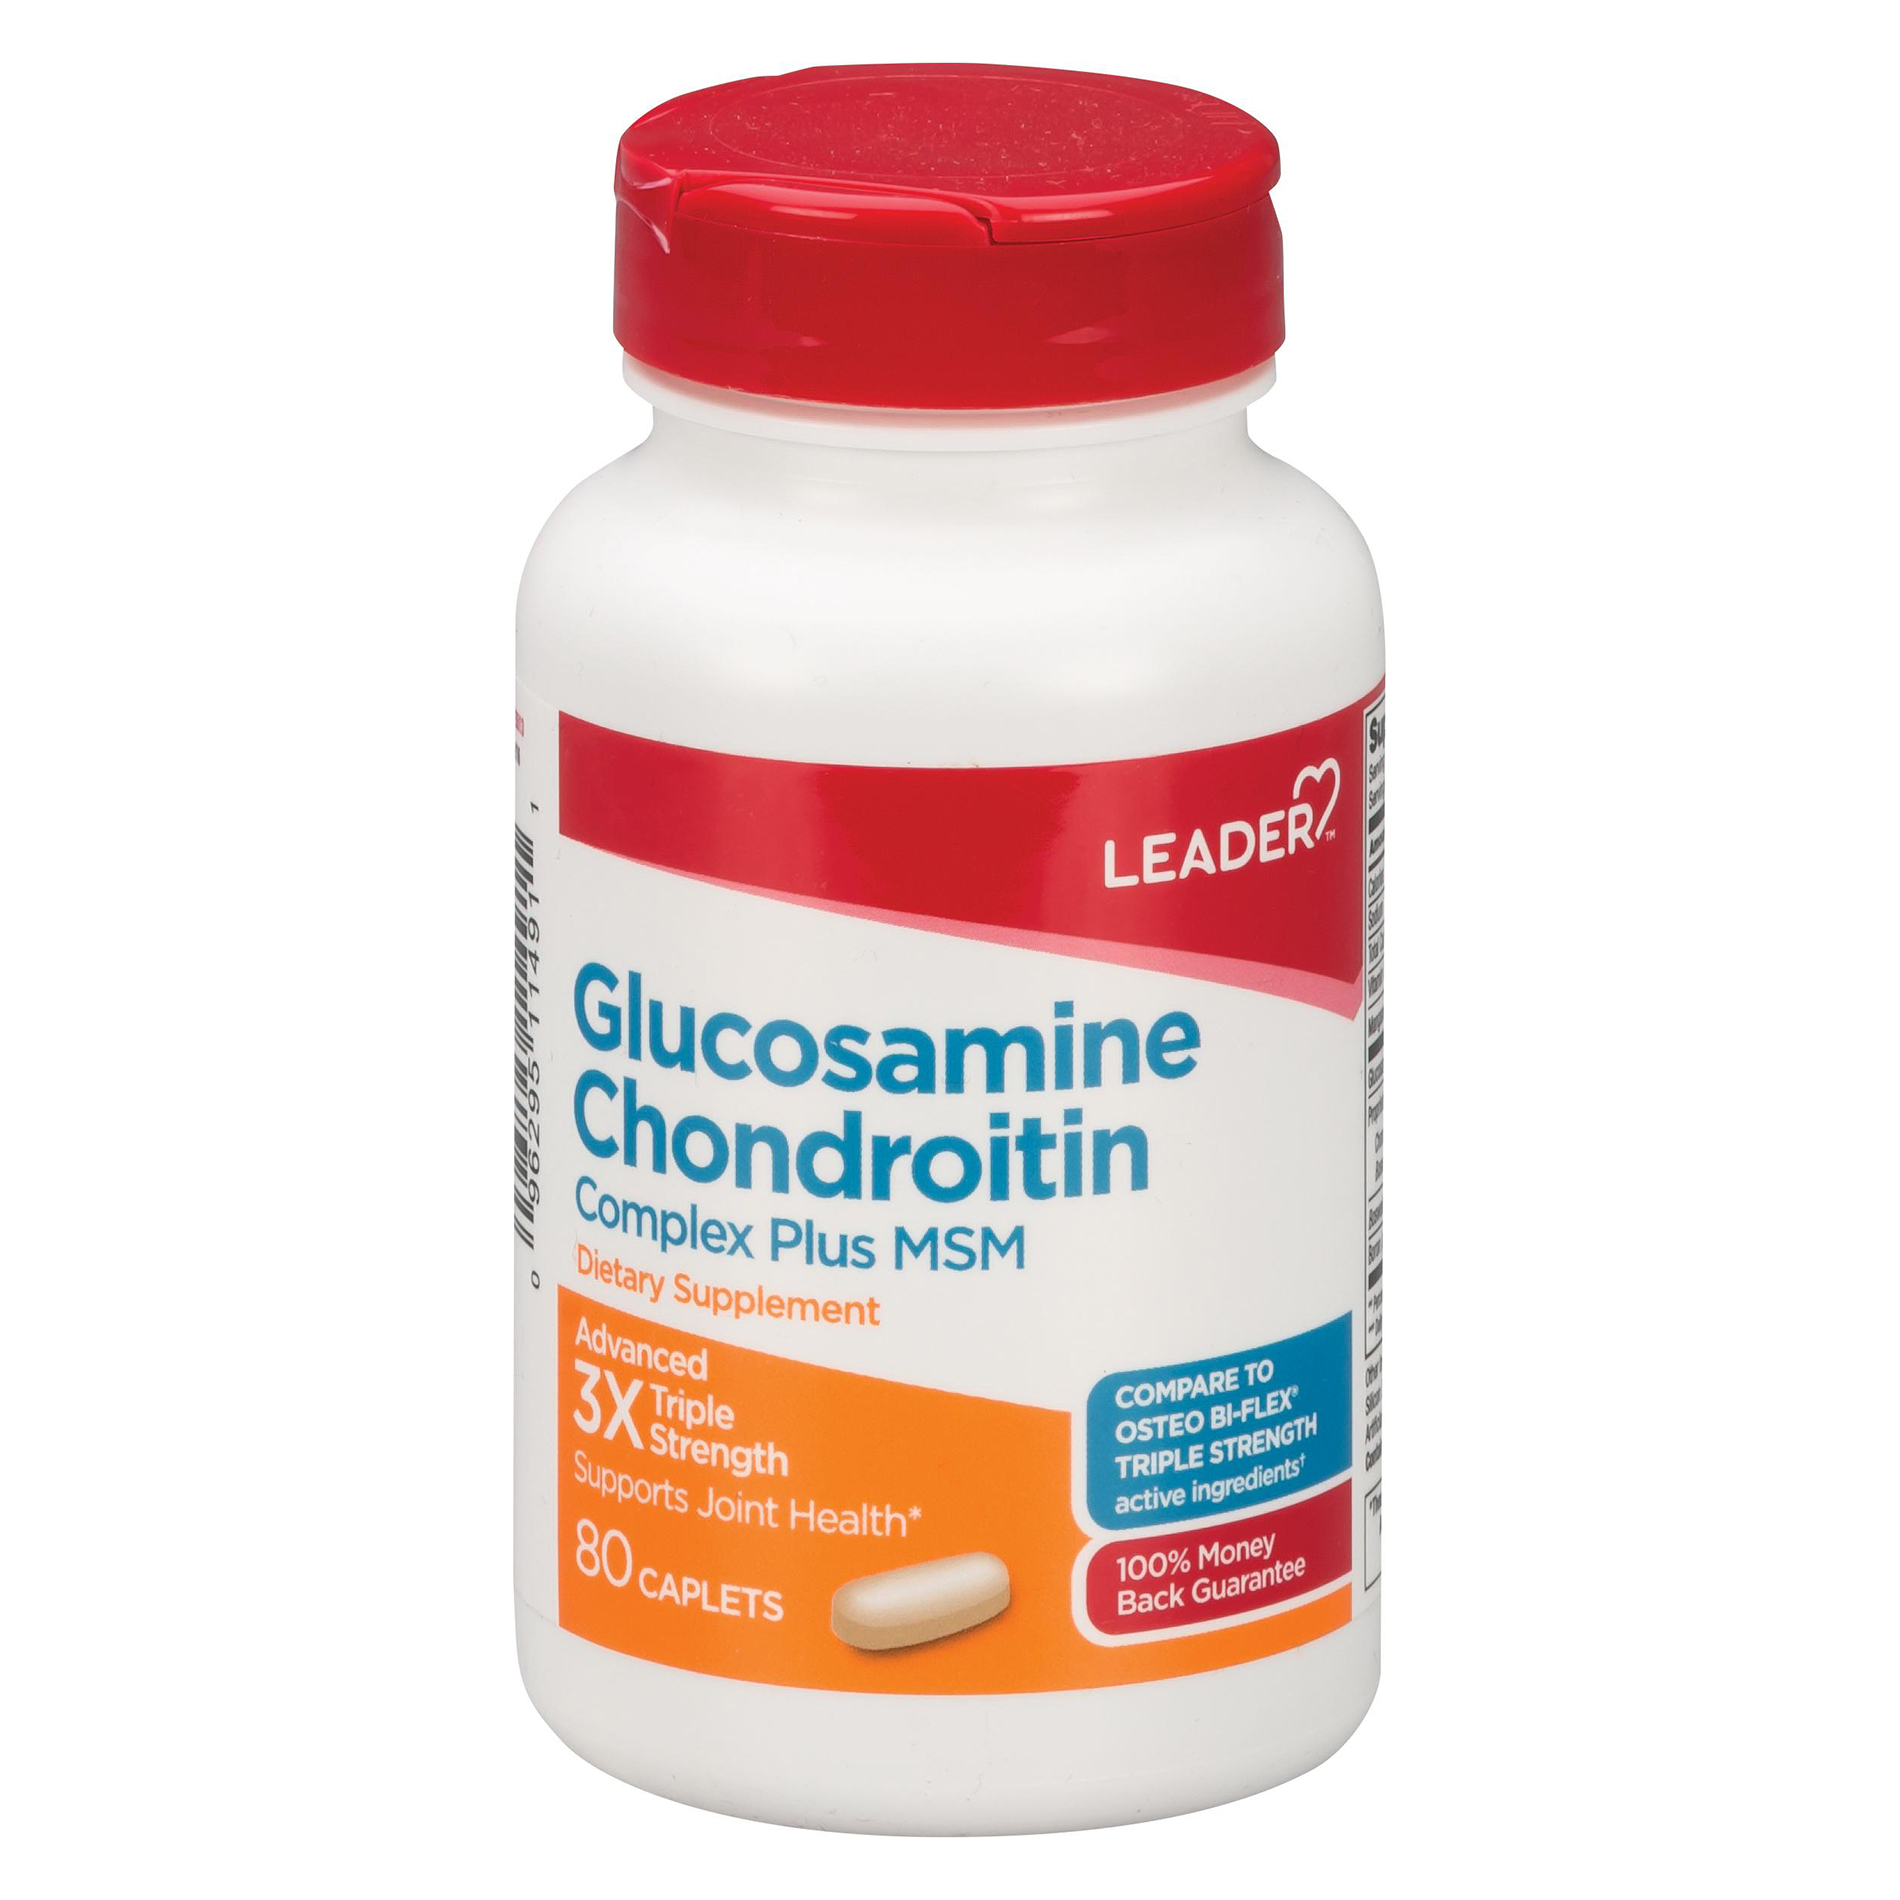 Leader Glucosamine Chondroitin Complex Plus MSM Triple Strength Caplets, 80 Count